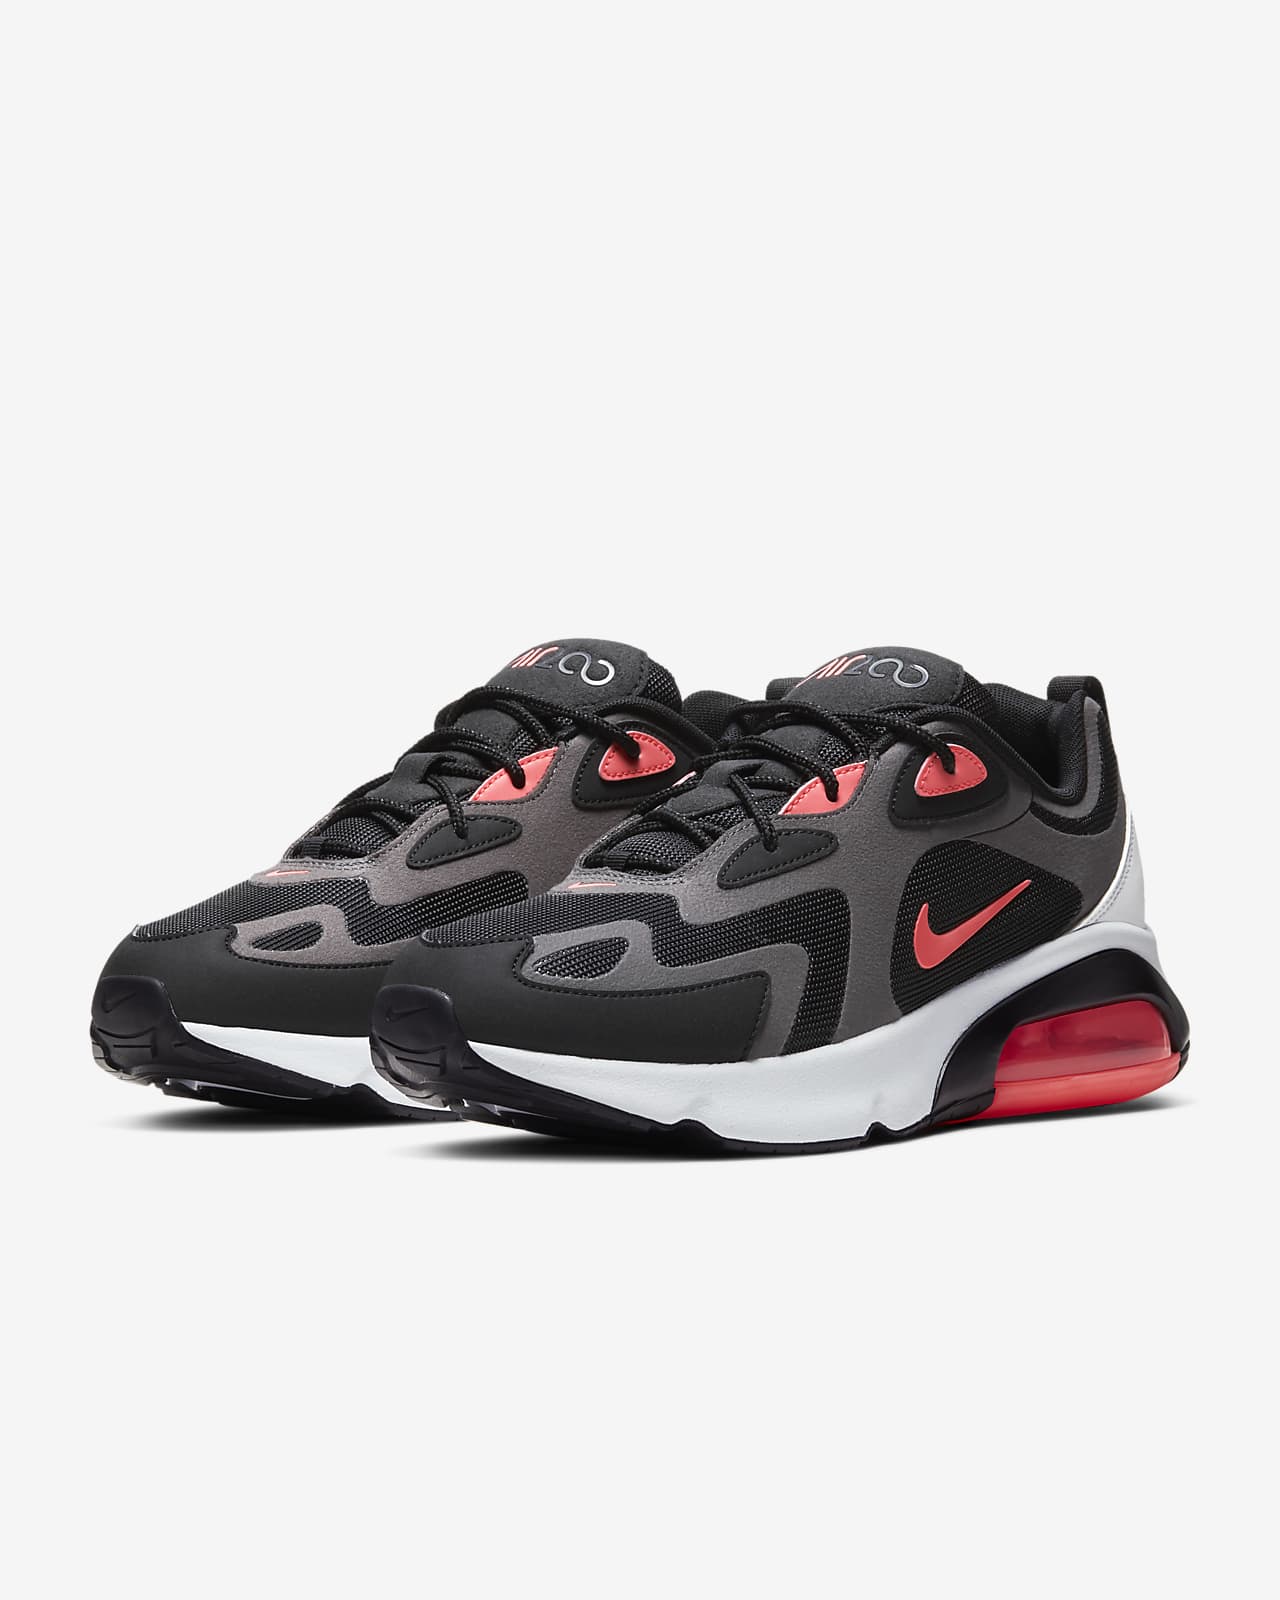 nike air max red shoes price in india